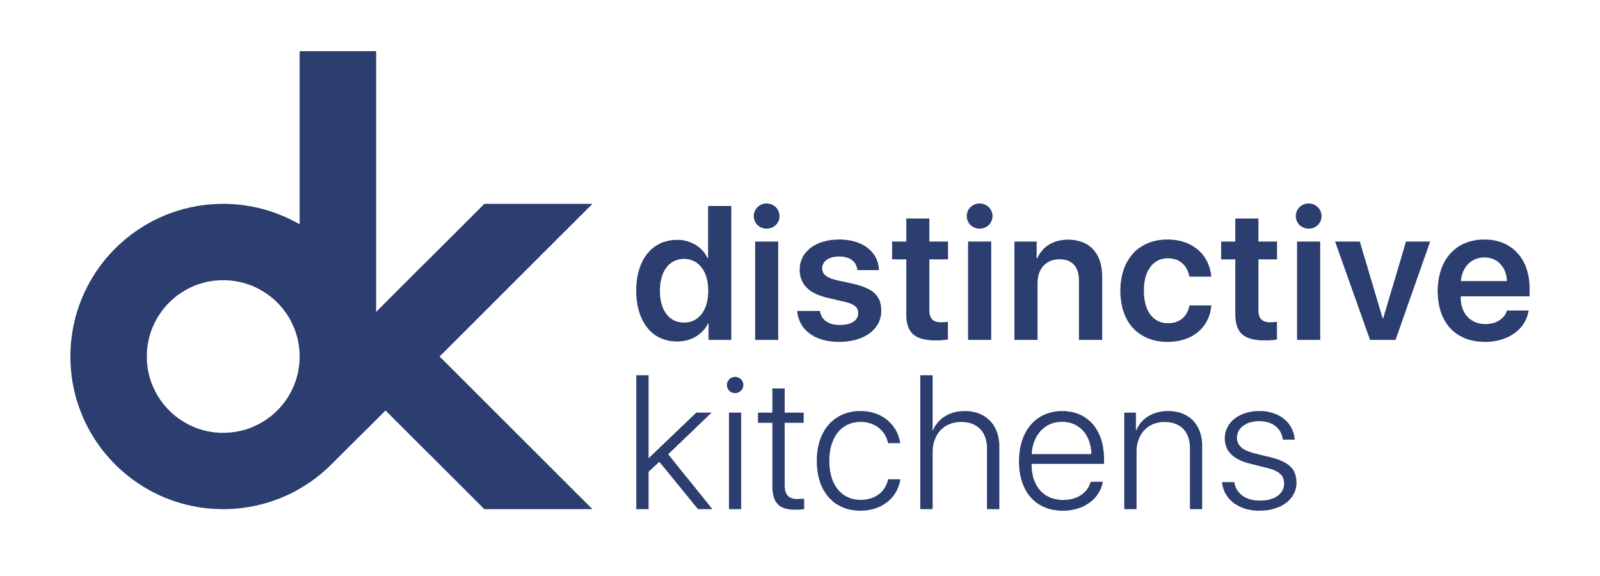 Distinctive kitchens creating designer kitchens in Brisbane with custom cabinet makers for kitchen renovations with bespoke joinery. remodeling kitchens with a 3d kitchen planner and full kitchen floor plans blue